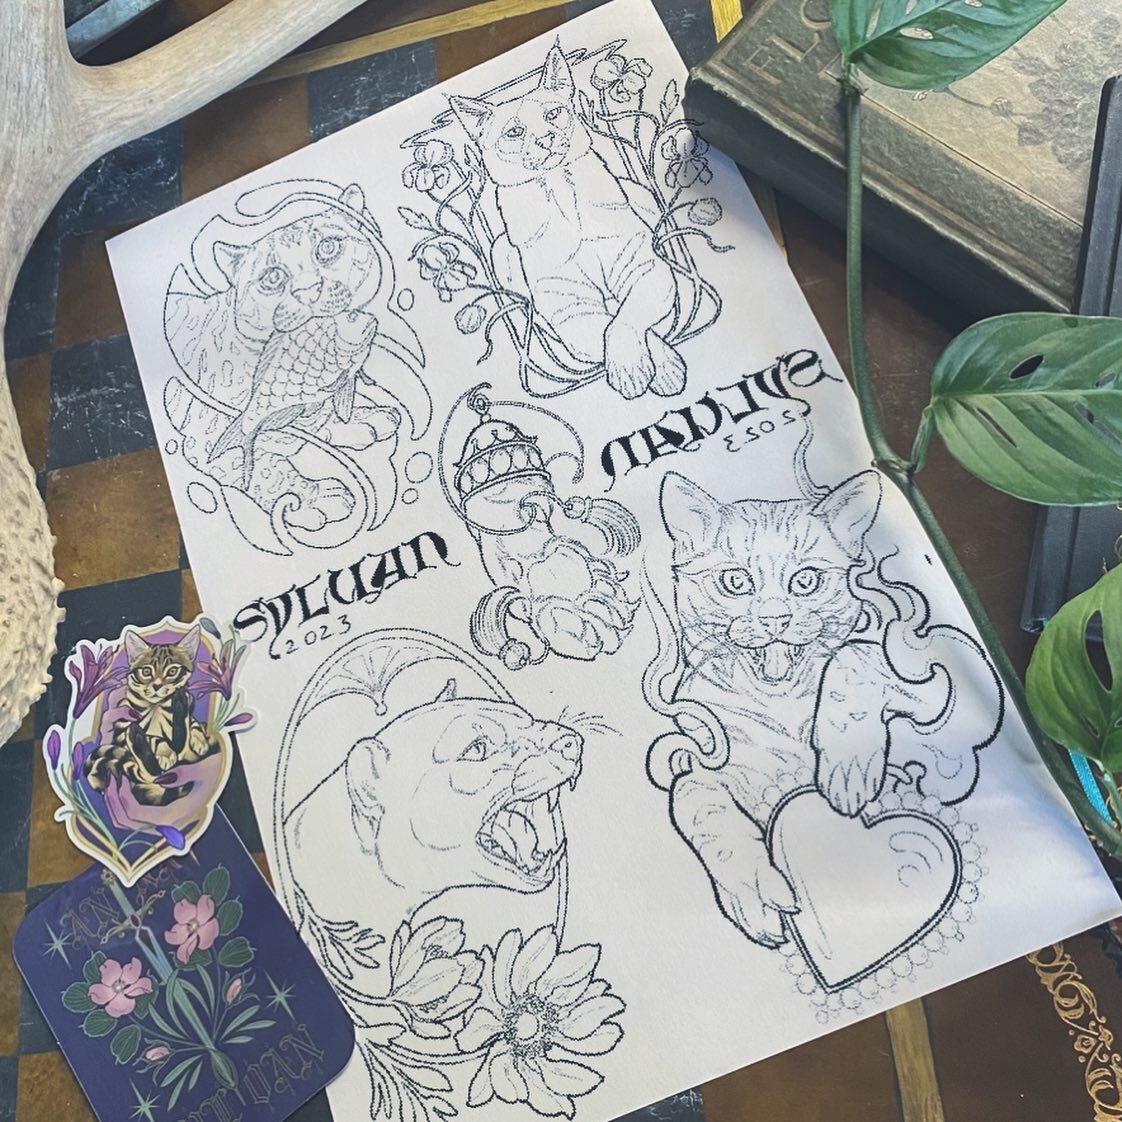 Last chance to book with me @lastmoontattoo in Columbus, Ohio! My Friday and Saturday are full, but I have time Thursday, 4/27 to do any of these available designs or your idea! Email me at sylvantattoos@gmail@com to grab a spot.